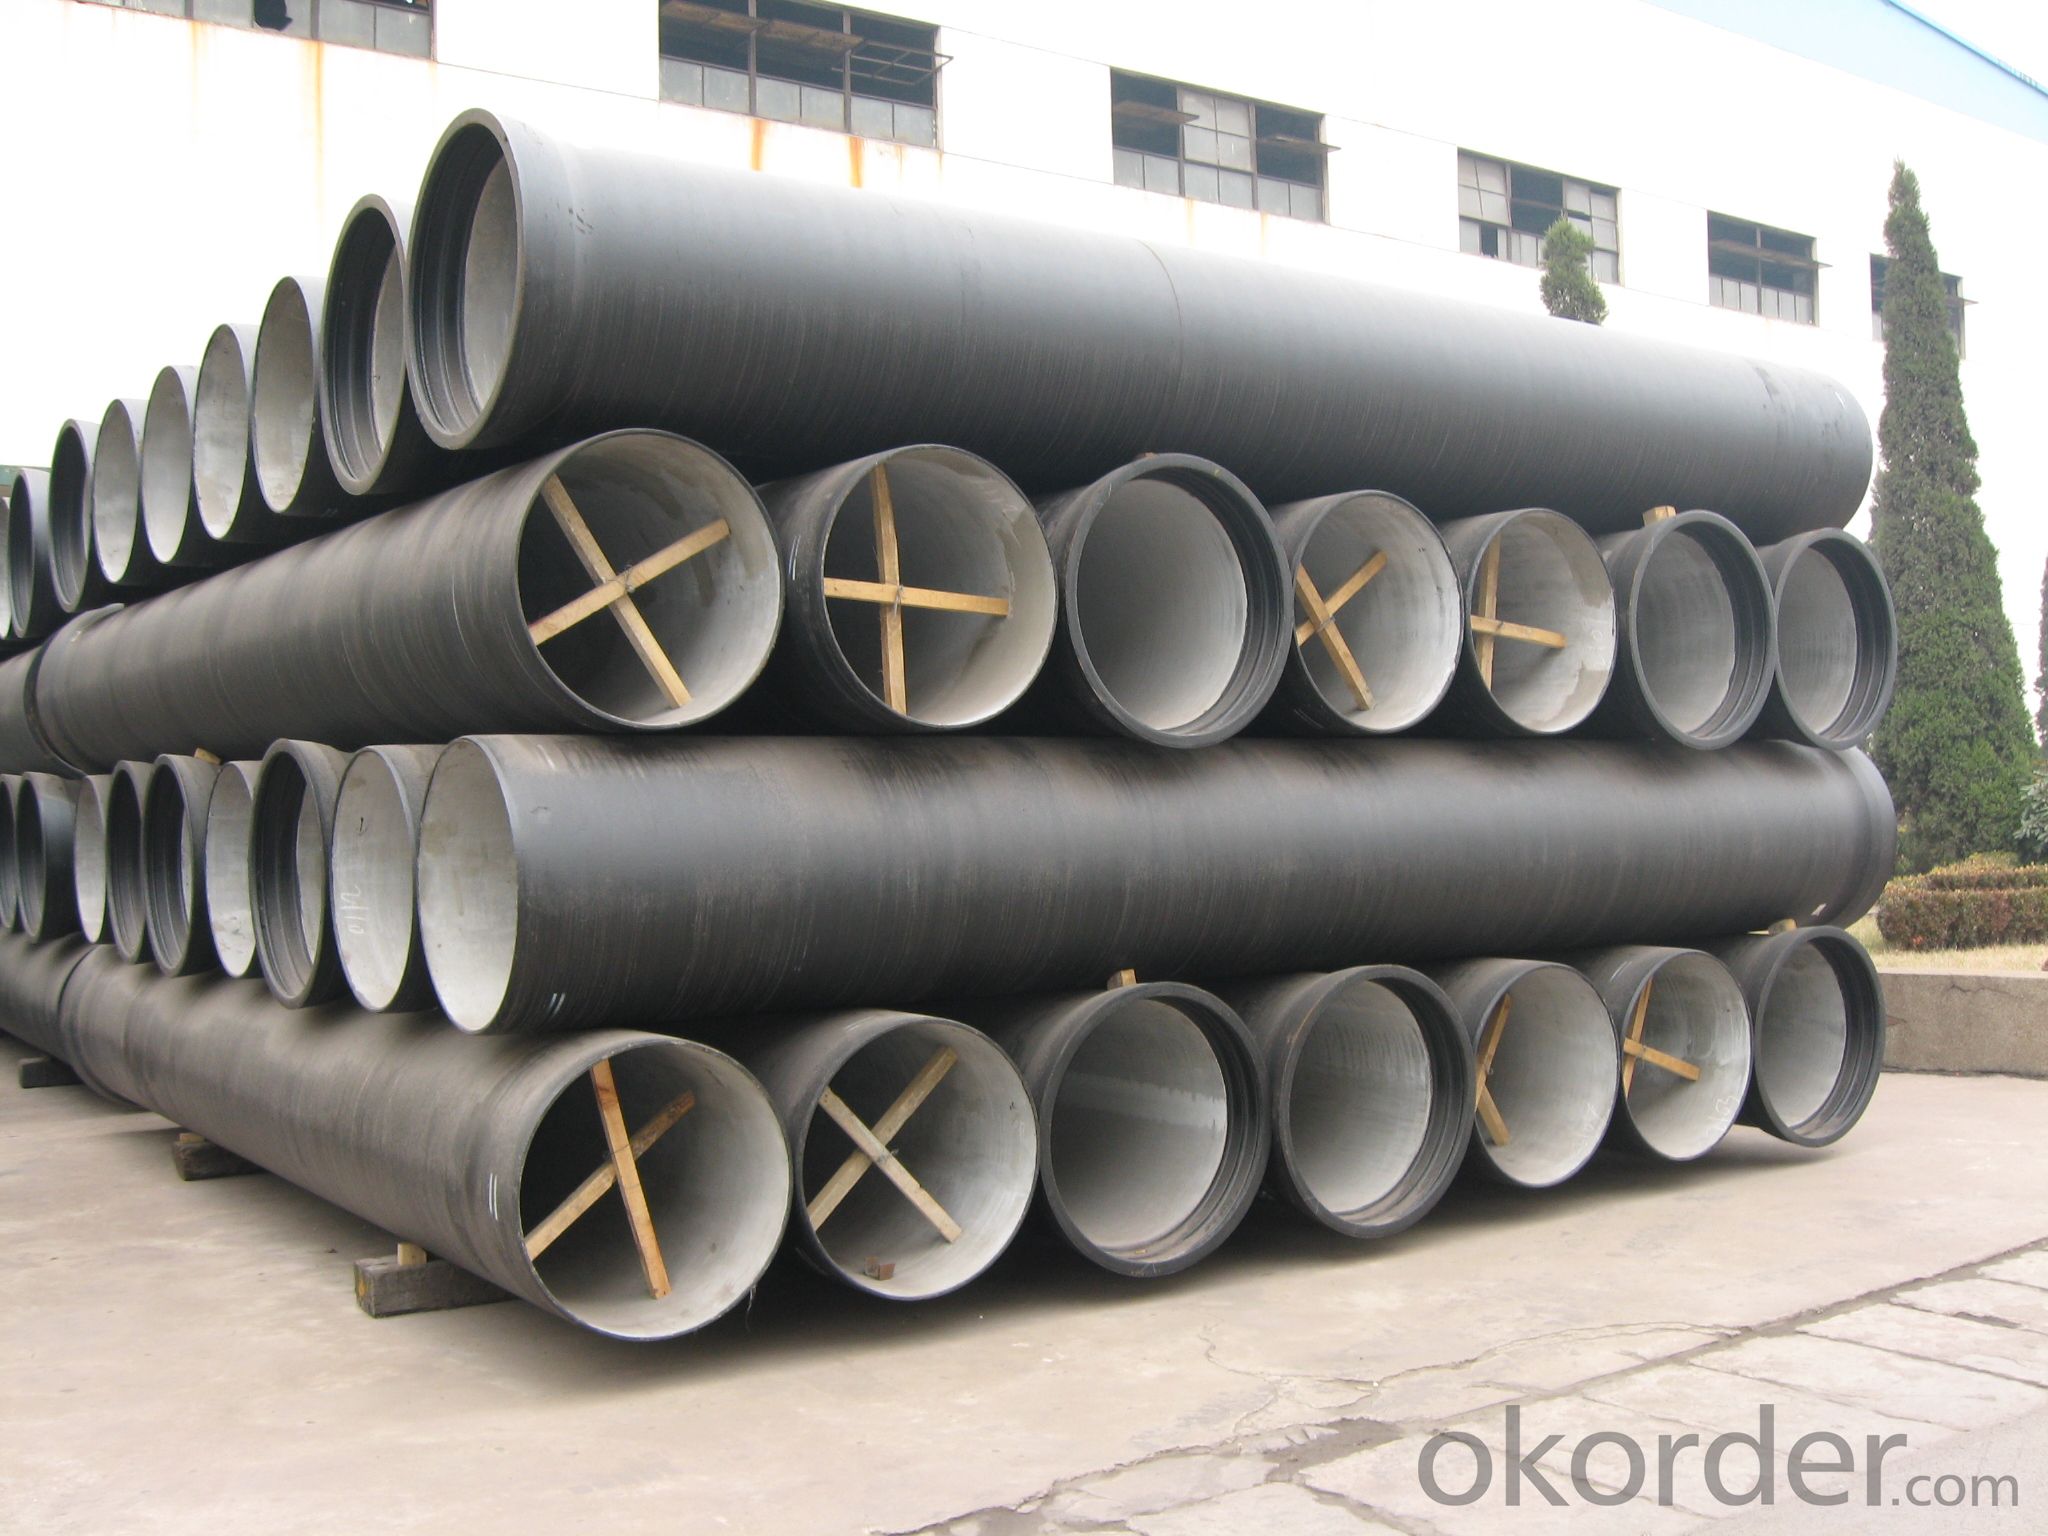 DUCTILE IRON PIPE DN600 C real-time quotes, last-sale prices -Okorder.com